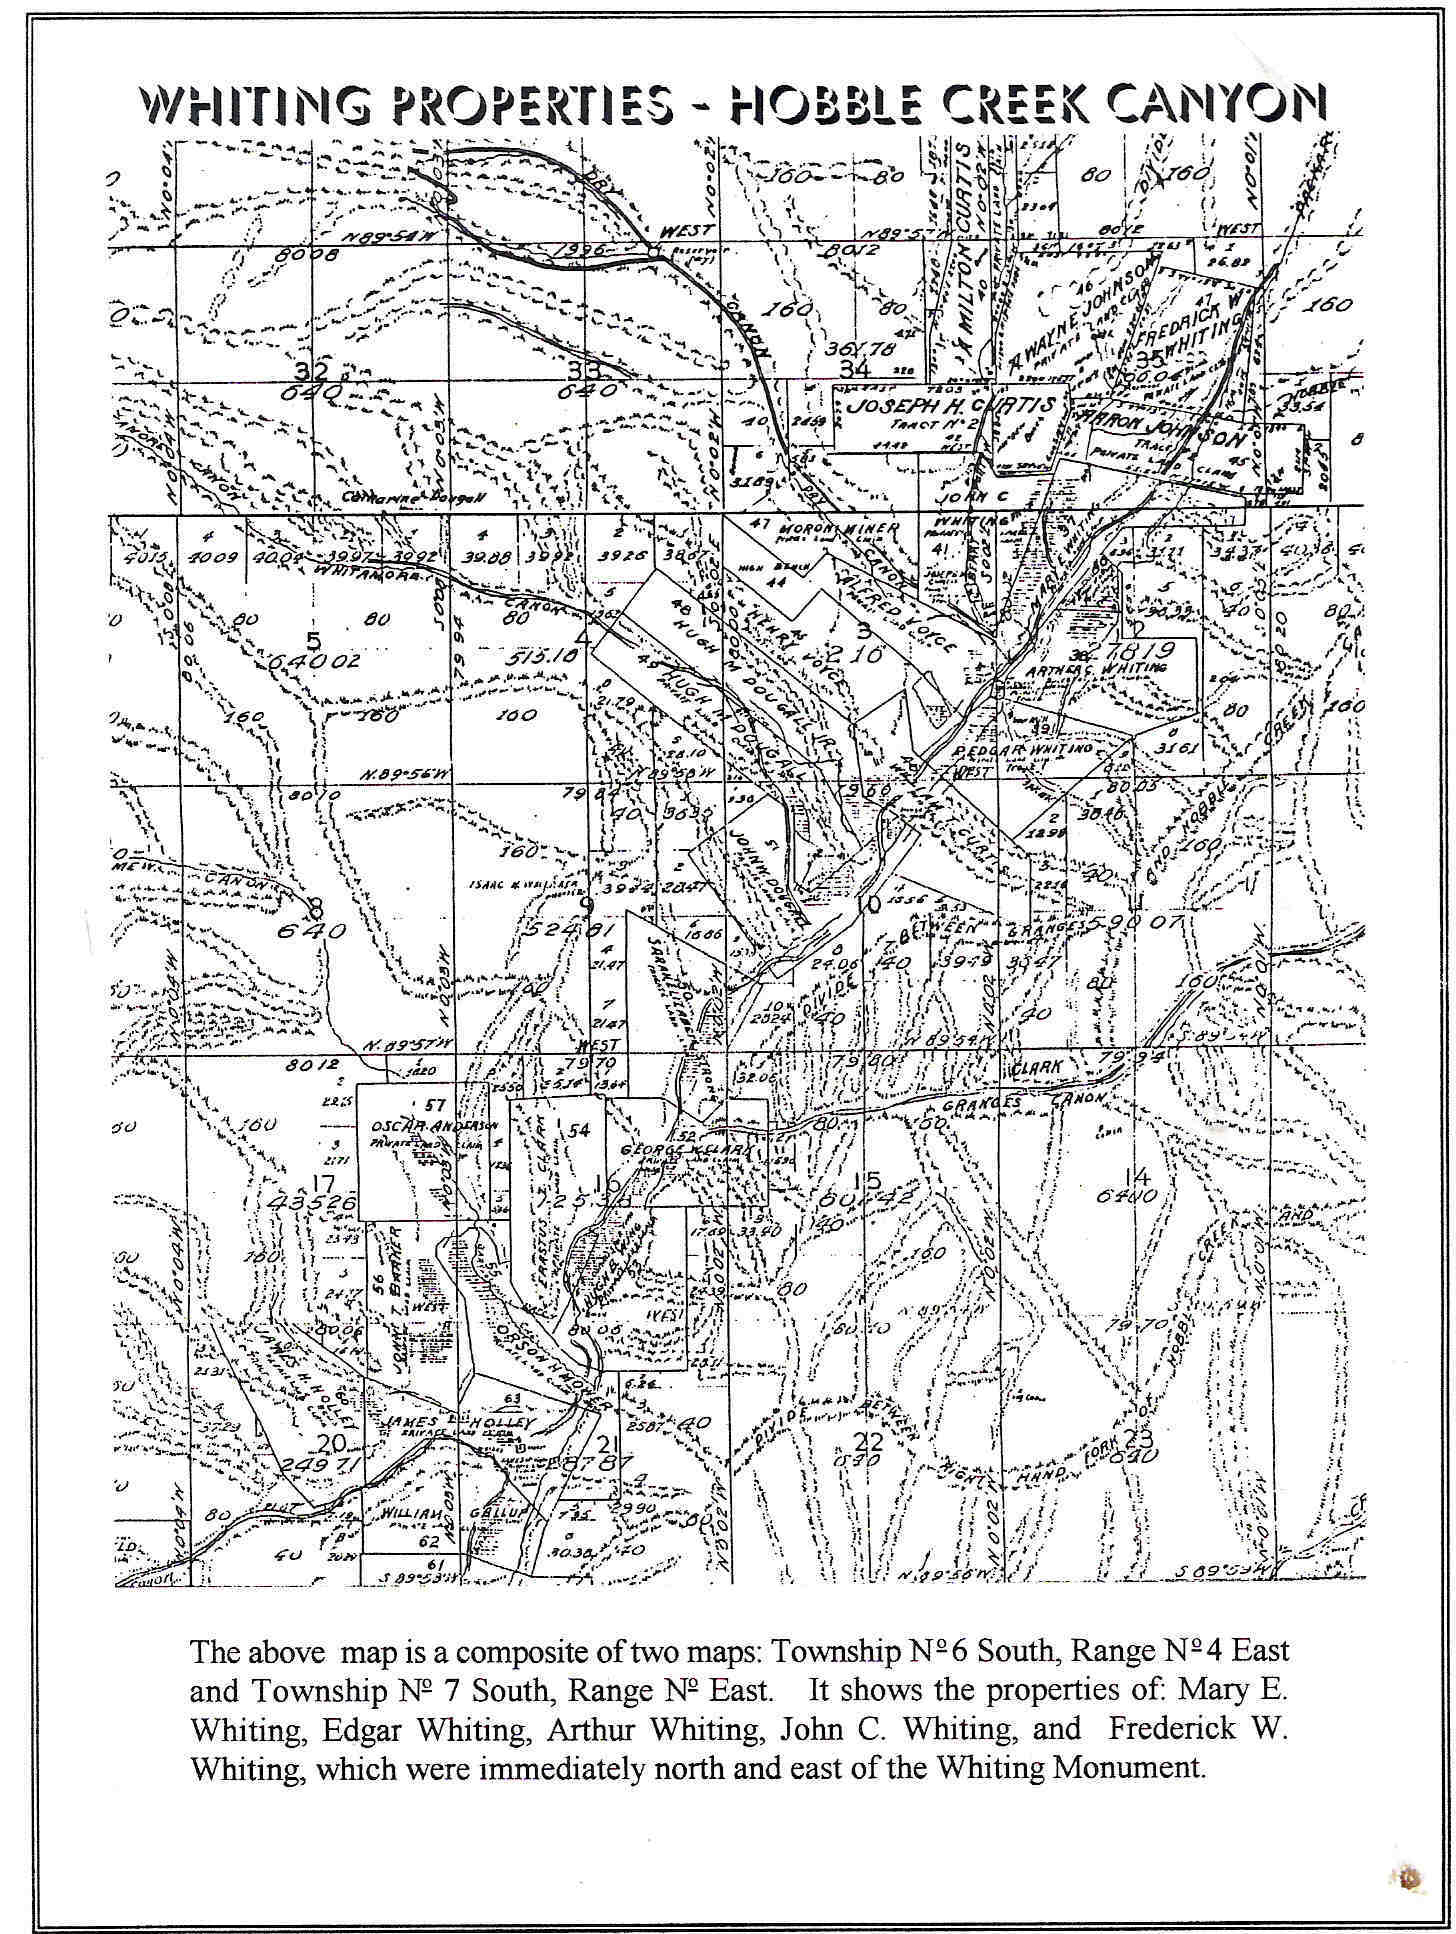 early-map-of-hobble-creek-canyon